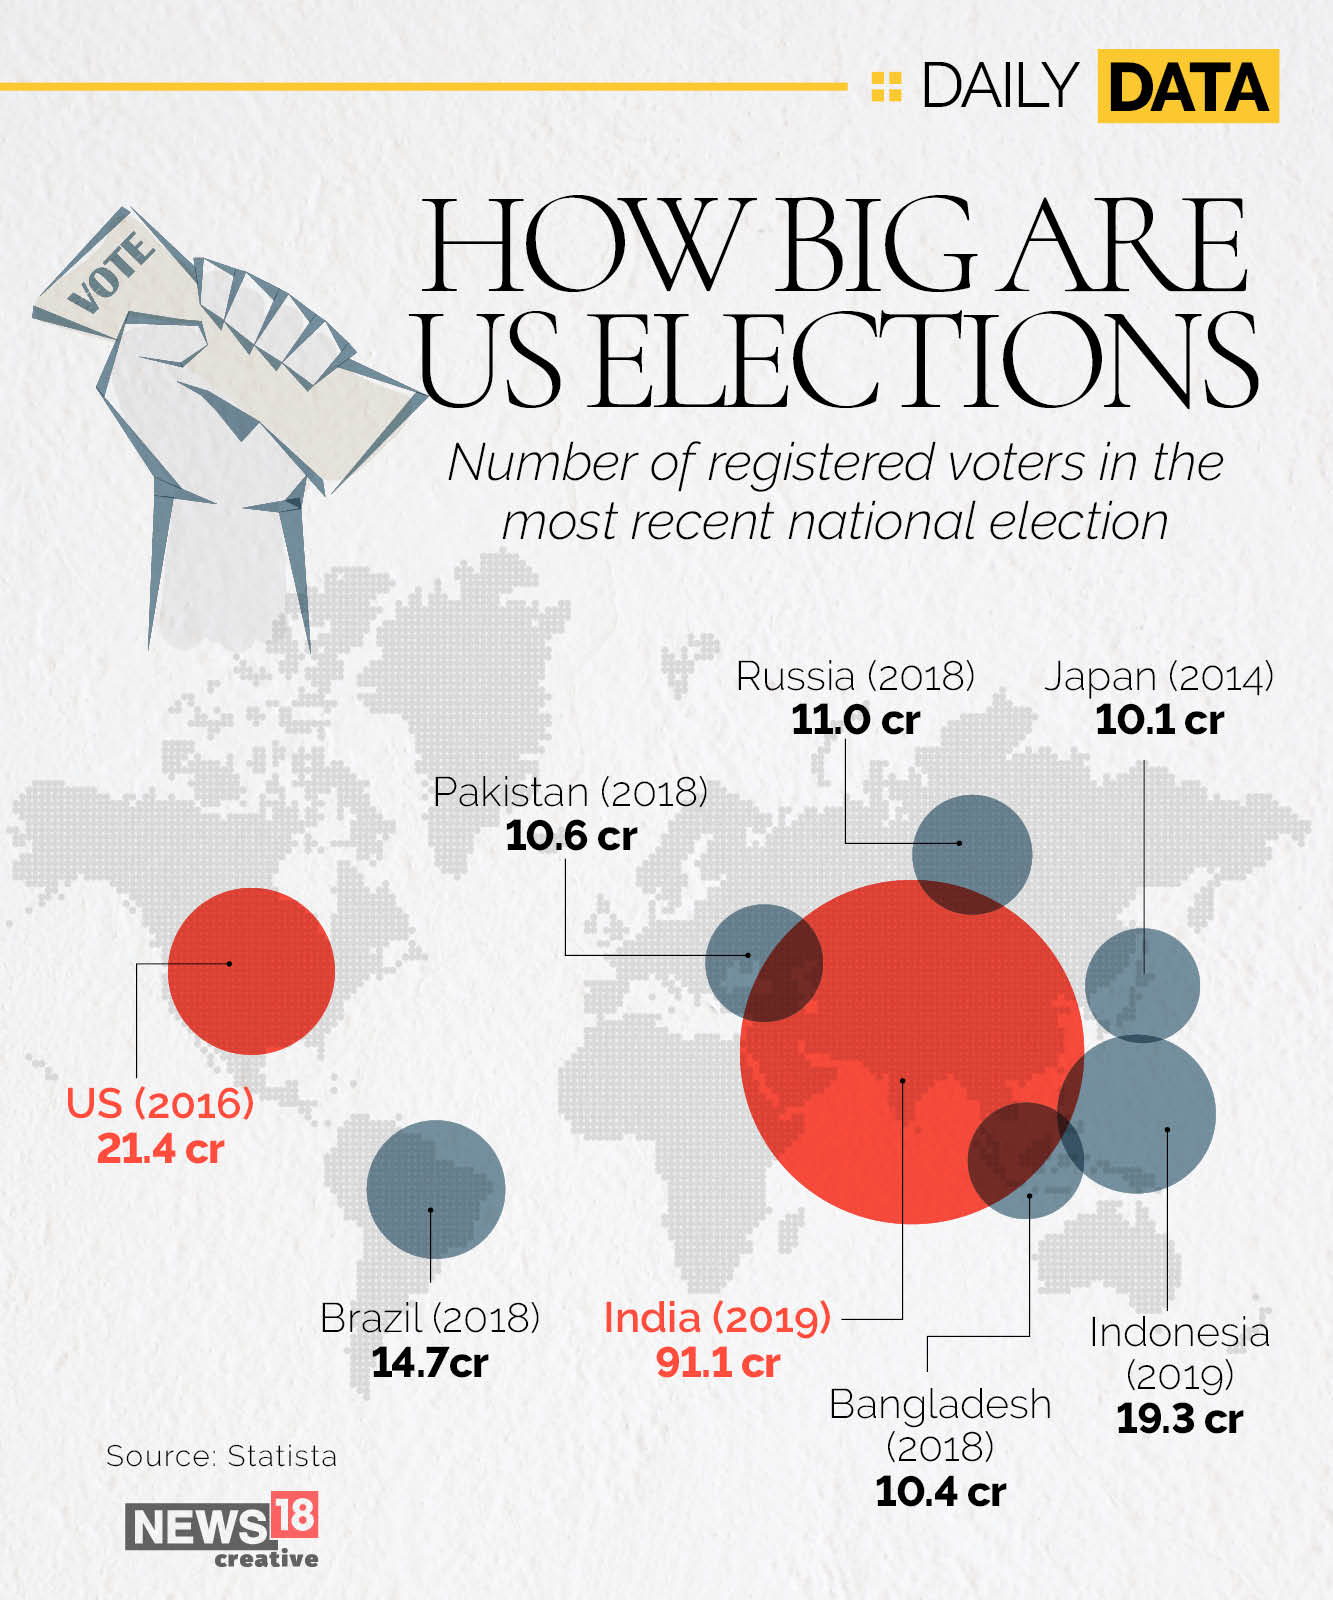 How big are US elections?